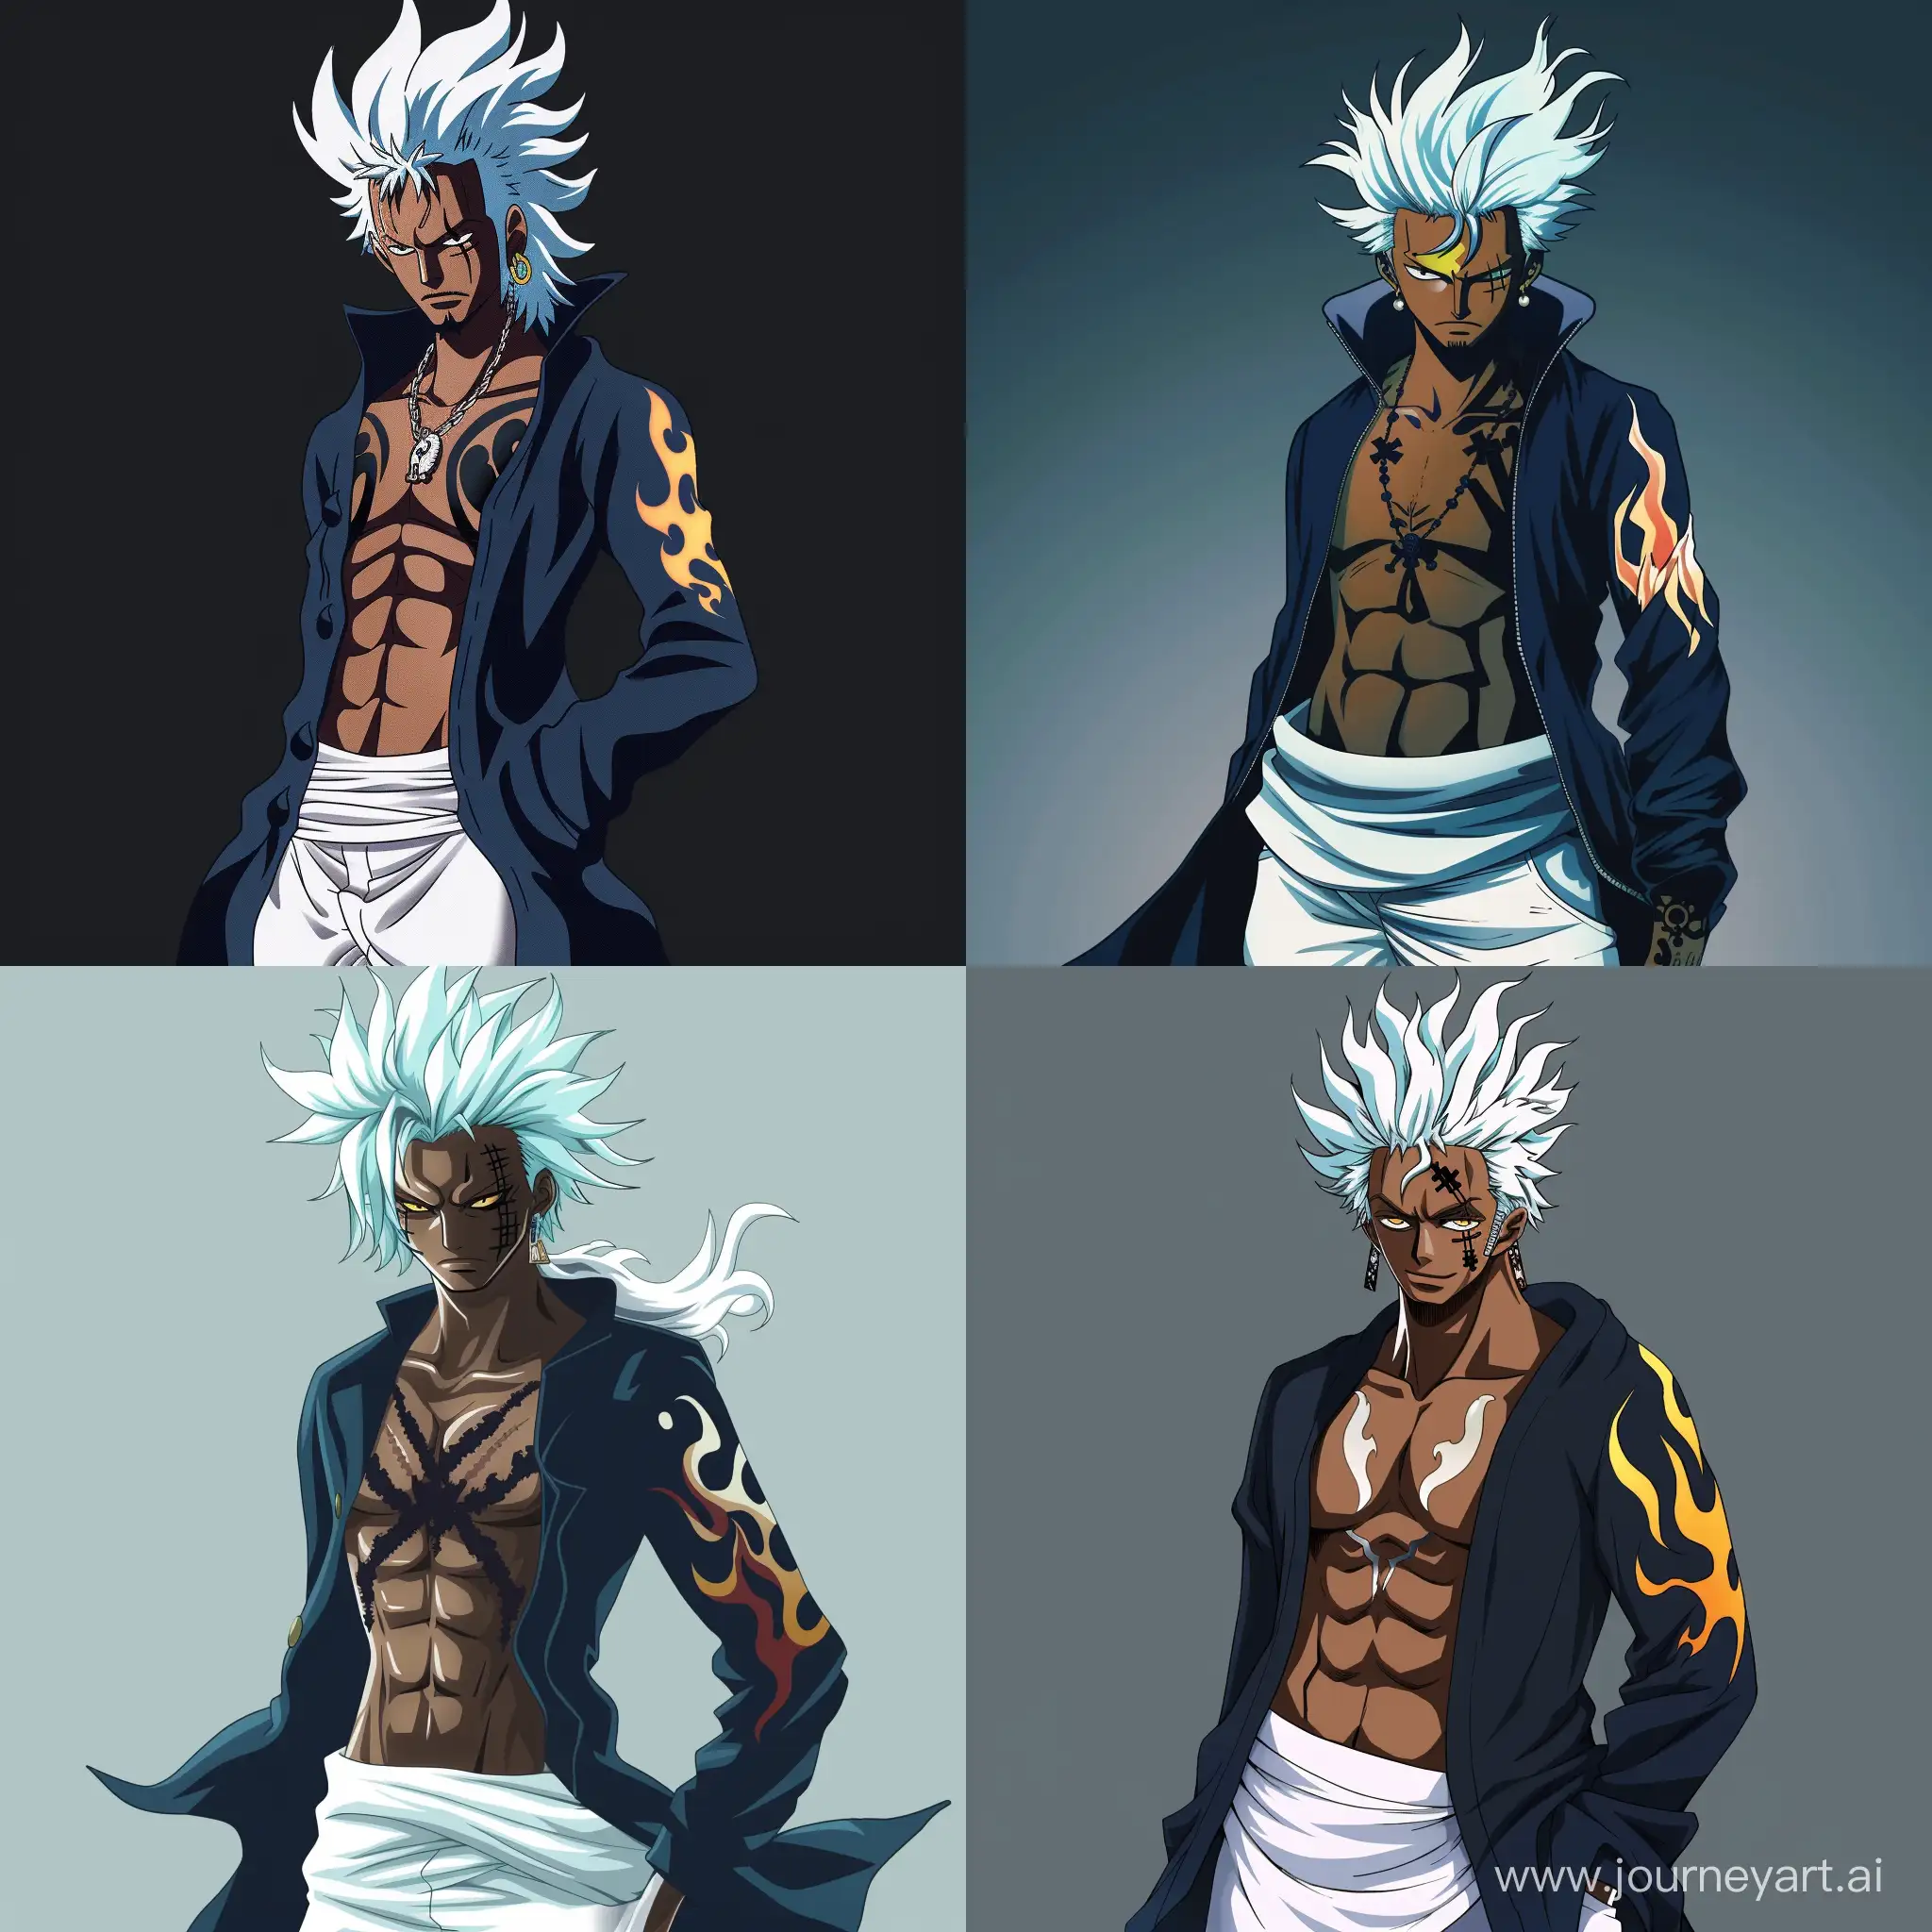 A One Piece character called Elvis Tek that is a 2.5 meters tall Shandia youth with dark skin. His white hair, tinted with light blue, is wild and spiky, except for a few strands that fall over his forehead. A single lock stands up from the top of his head. He bears a black tribal tattoo of flames on the right side of his body. His left eye is yellow, while his right eye is missing and scarred. He dresses in a dark blue cardigan that he leaves open, revealing his chest, and white baggy pants